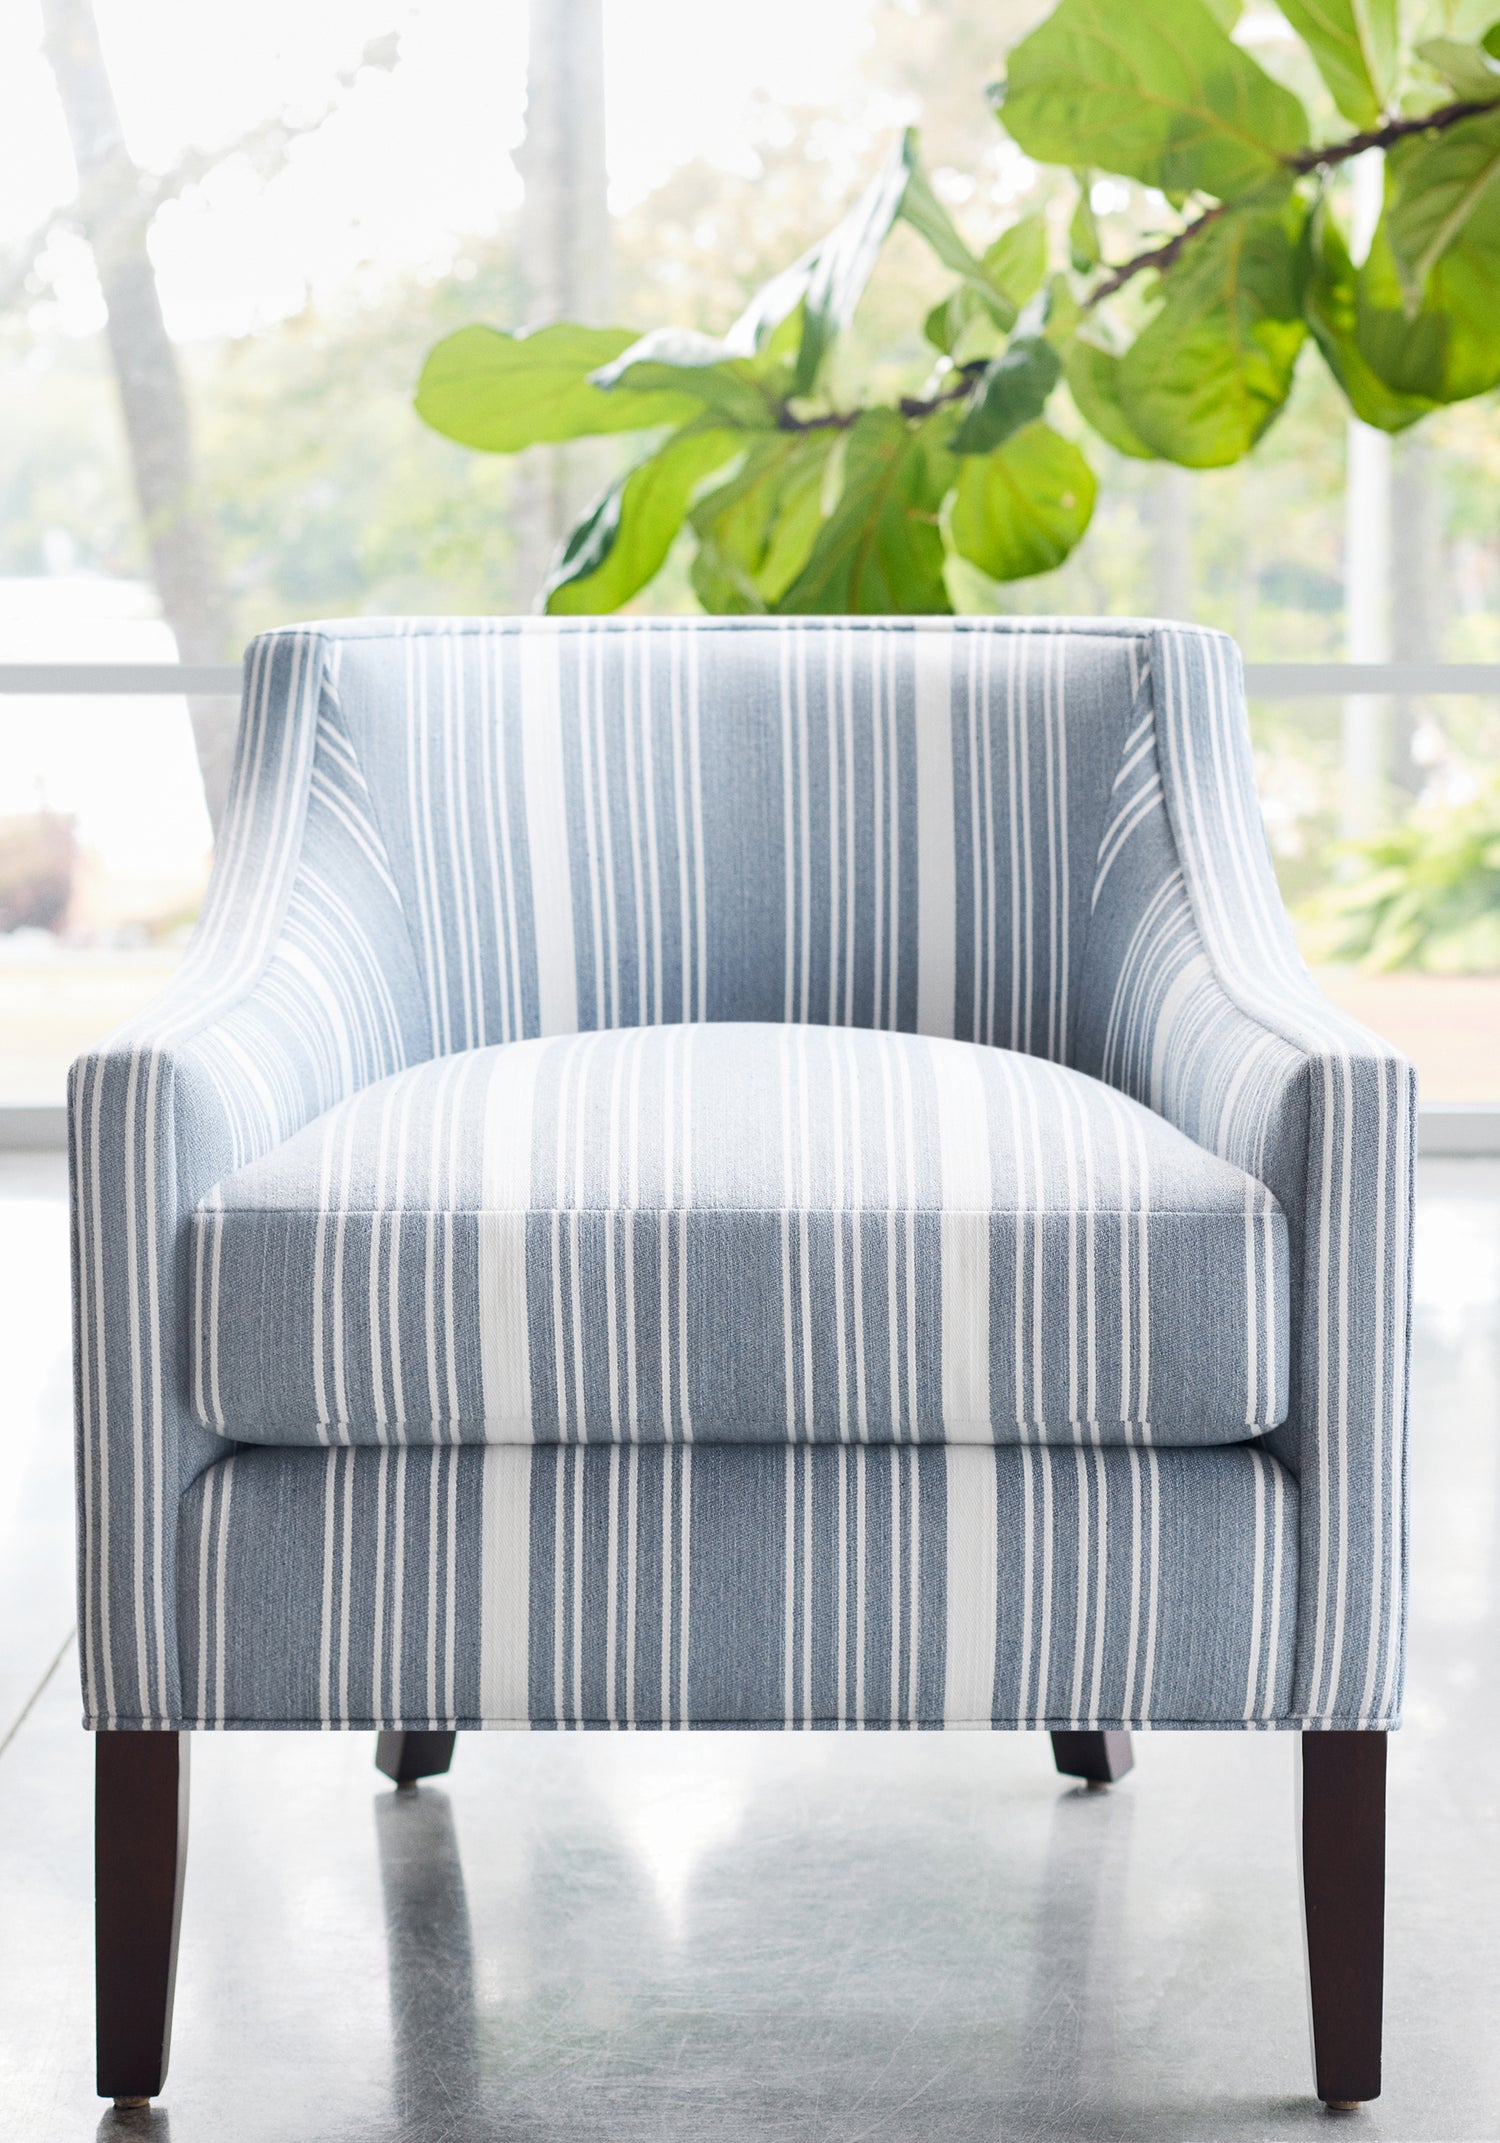 Chair in Kaia Stripe fabric in horizon color - pattern number W8540 - by Thibaut in the Villa collection